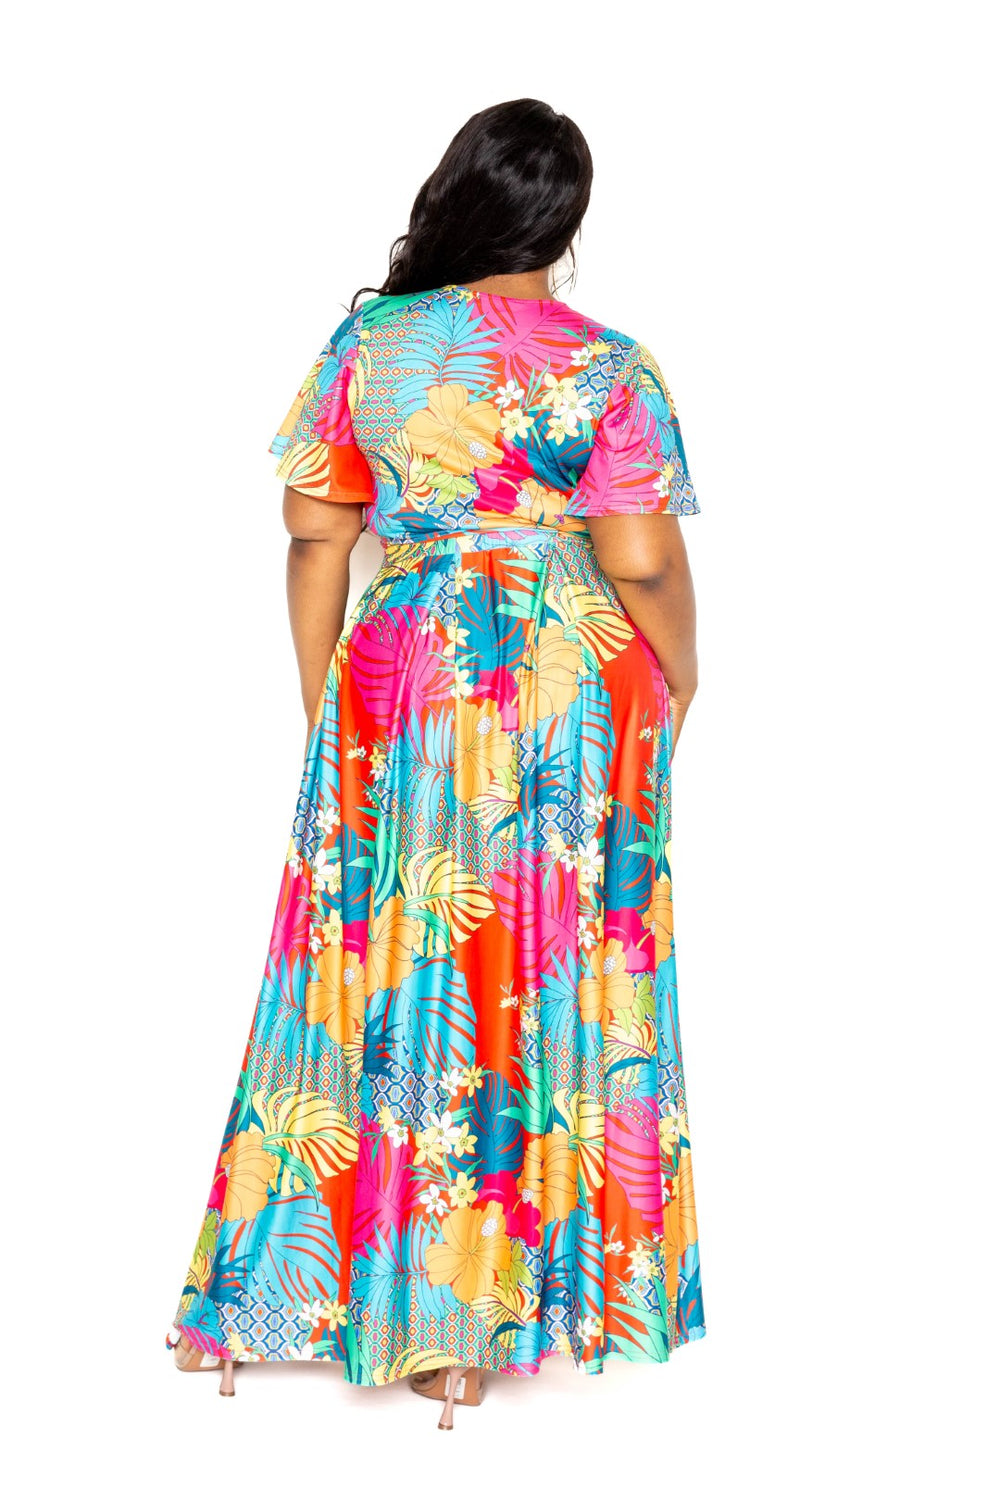 Buxom Couture Tropical Maxi Skirt & Top Set Outfit Sets RYSE Clothing Co.   